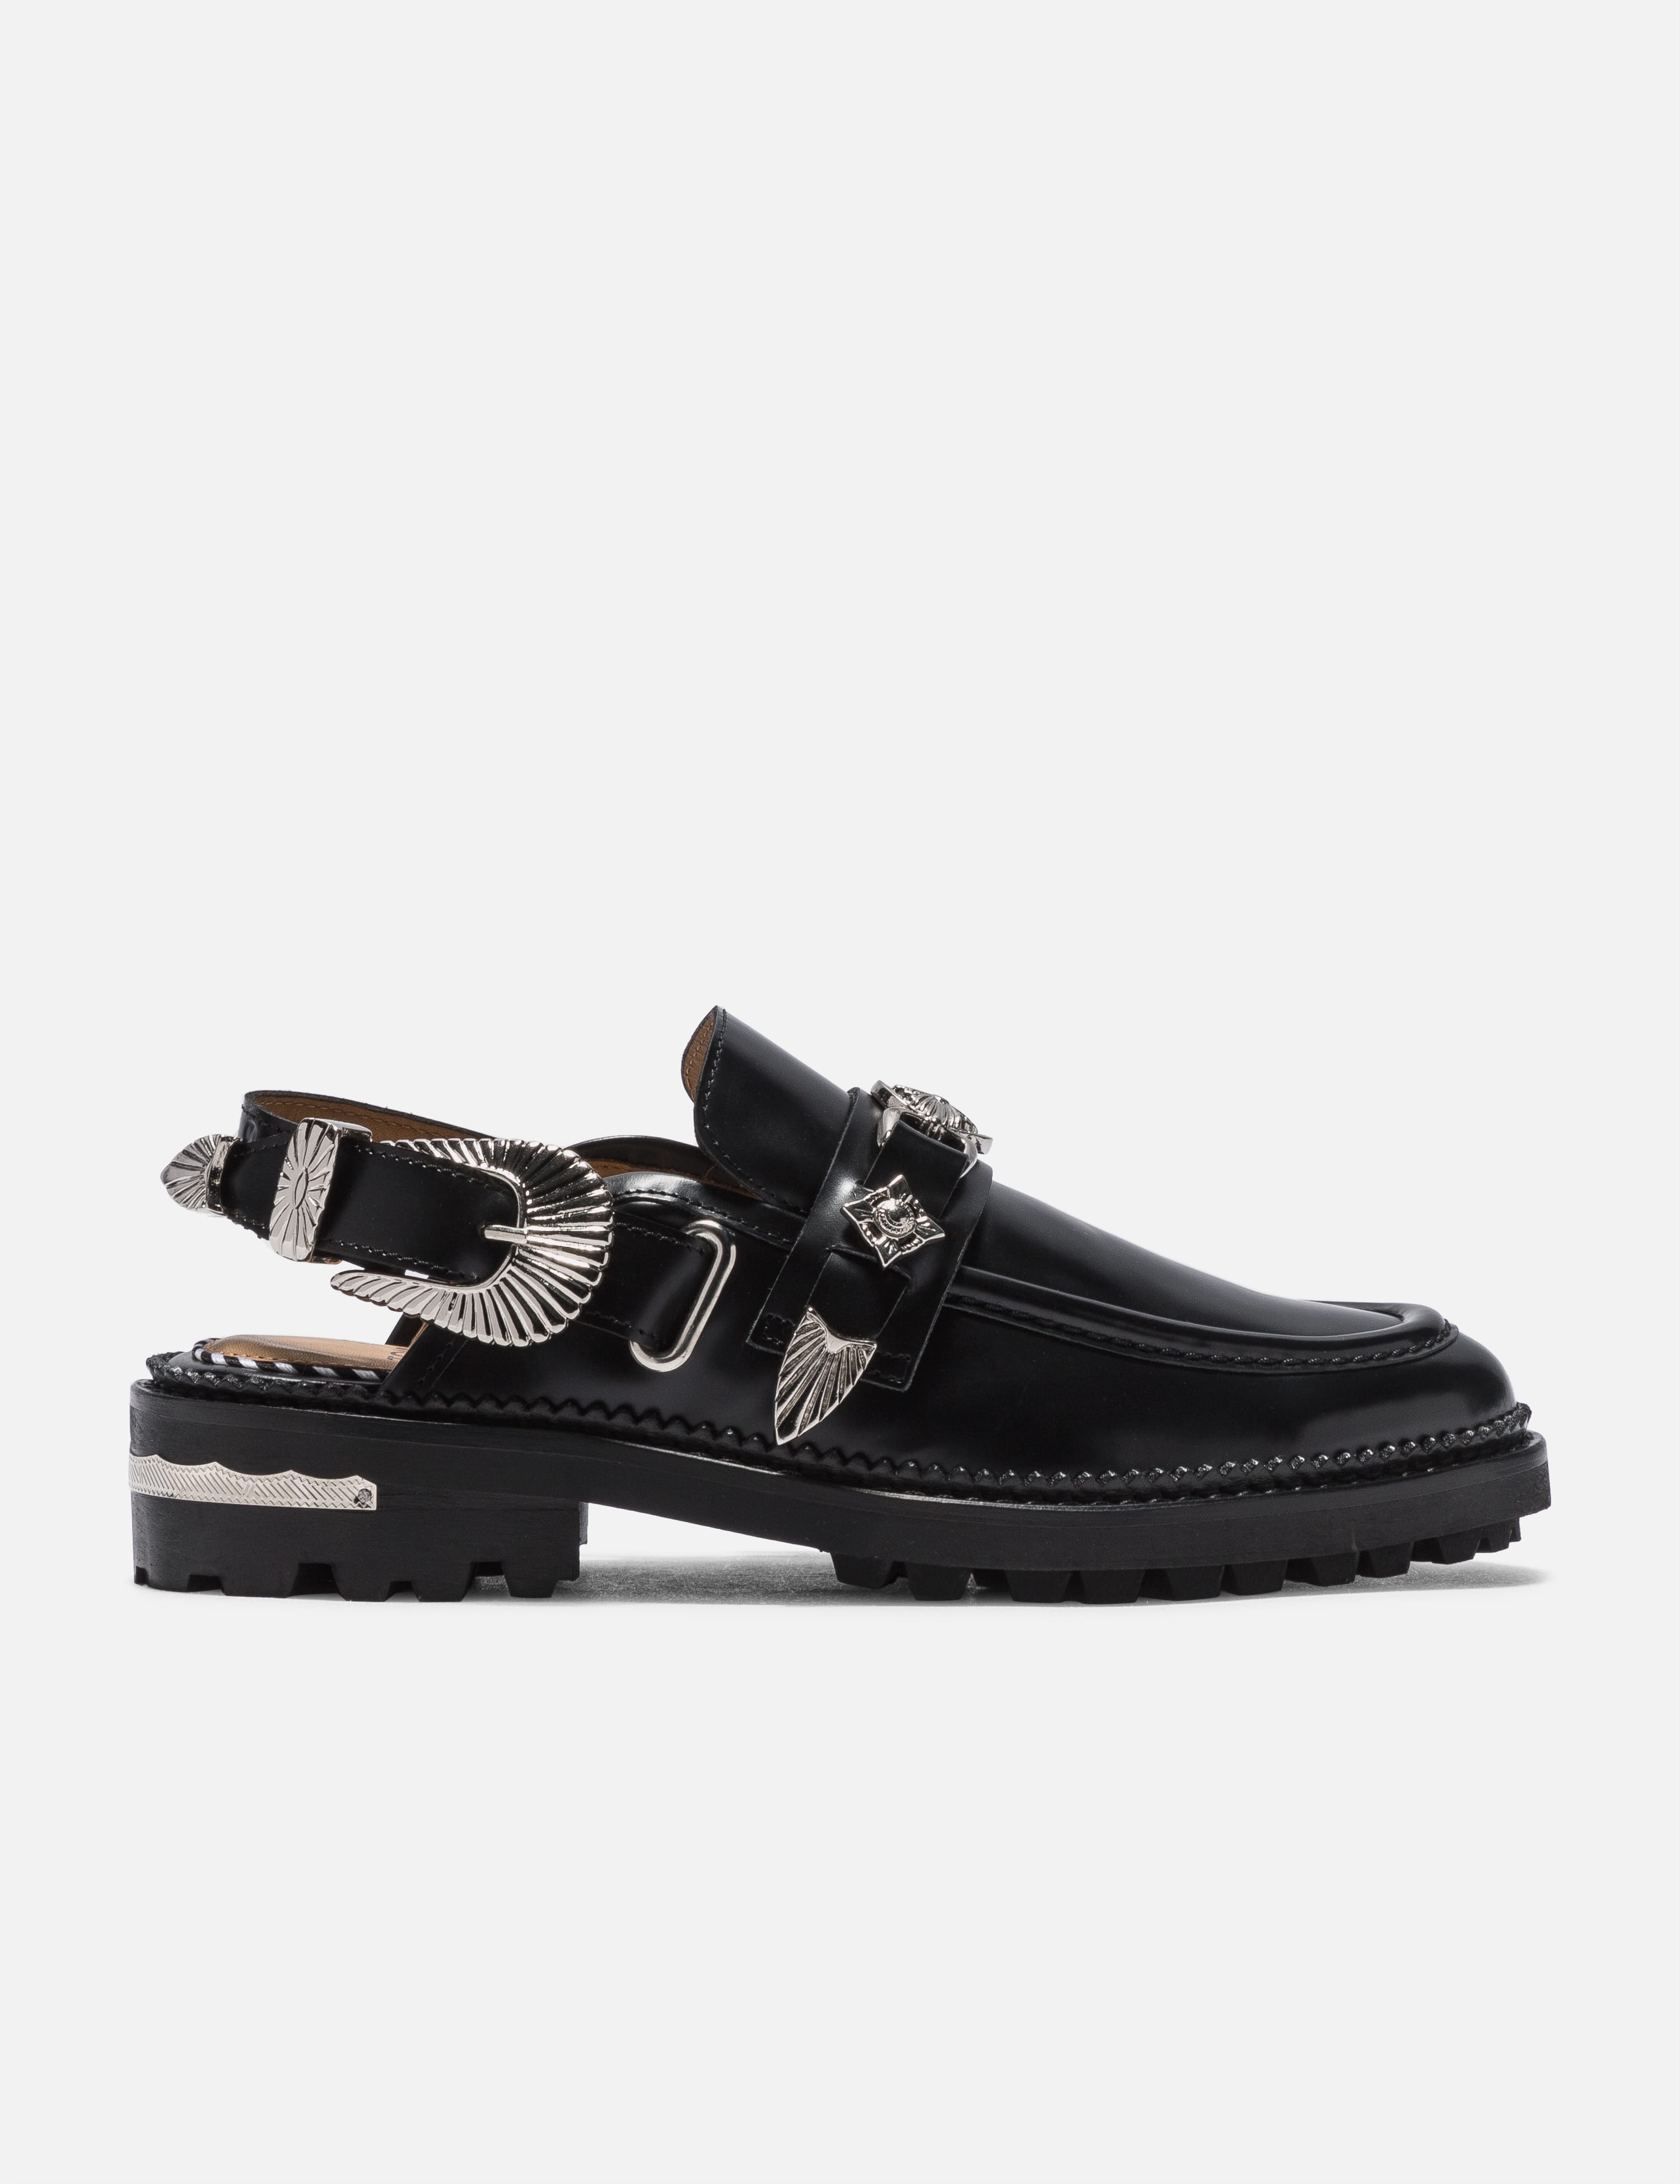 Toga Pulla - Metal Mule Loafer | HBX - Globally Curated Fashion